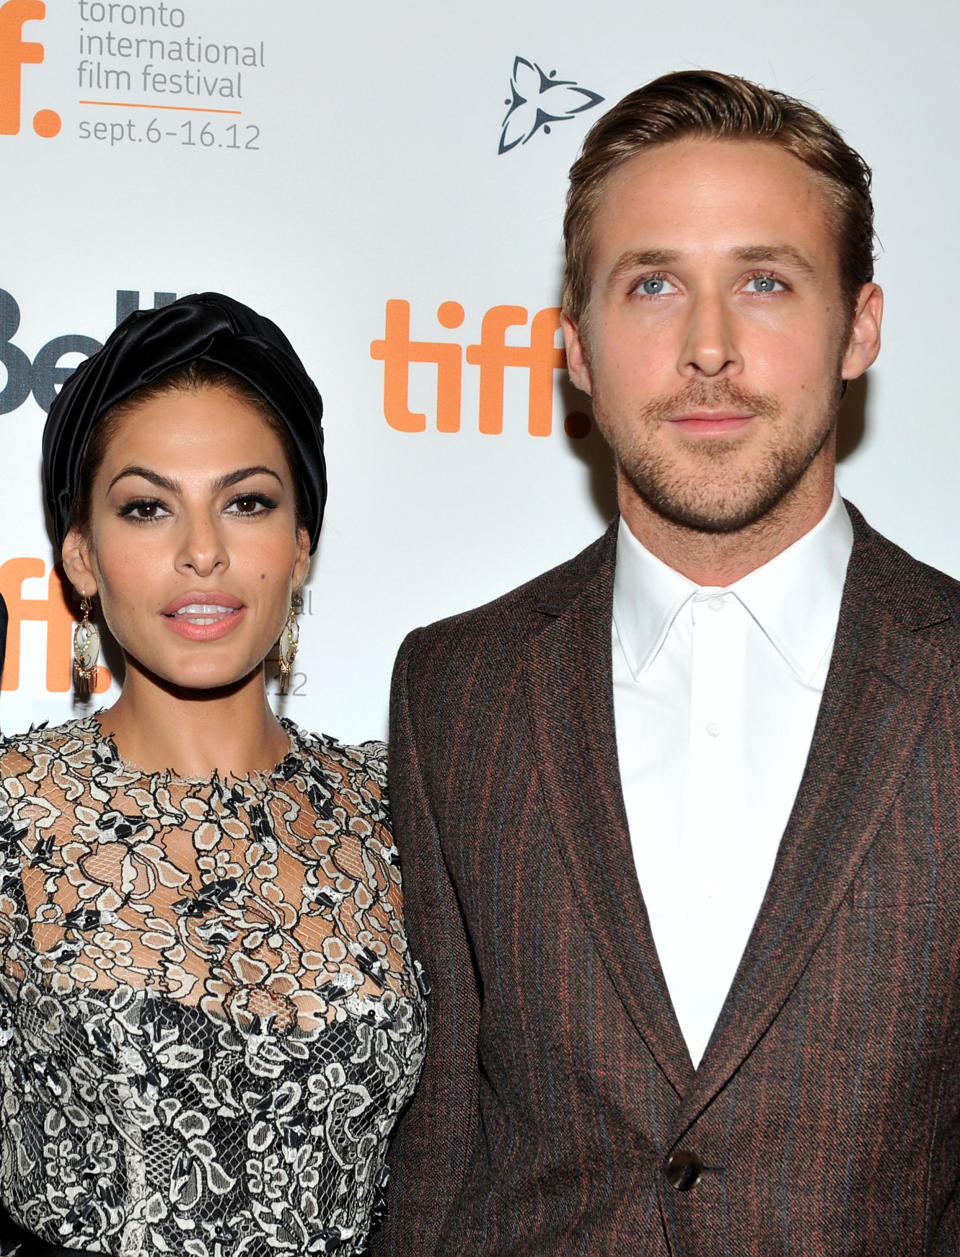 Ryan Gosling and Eva Mendes are an extremely private couple, their relationship first began back in 2011. They now have two children together, and while rumours have swirled it has never been confirmed whether the pair are actually married. Photo: Getty Images